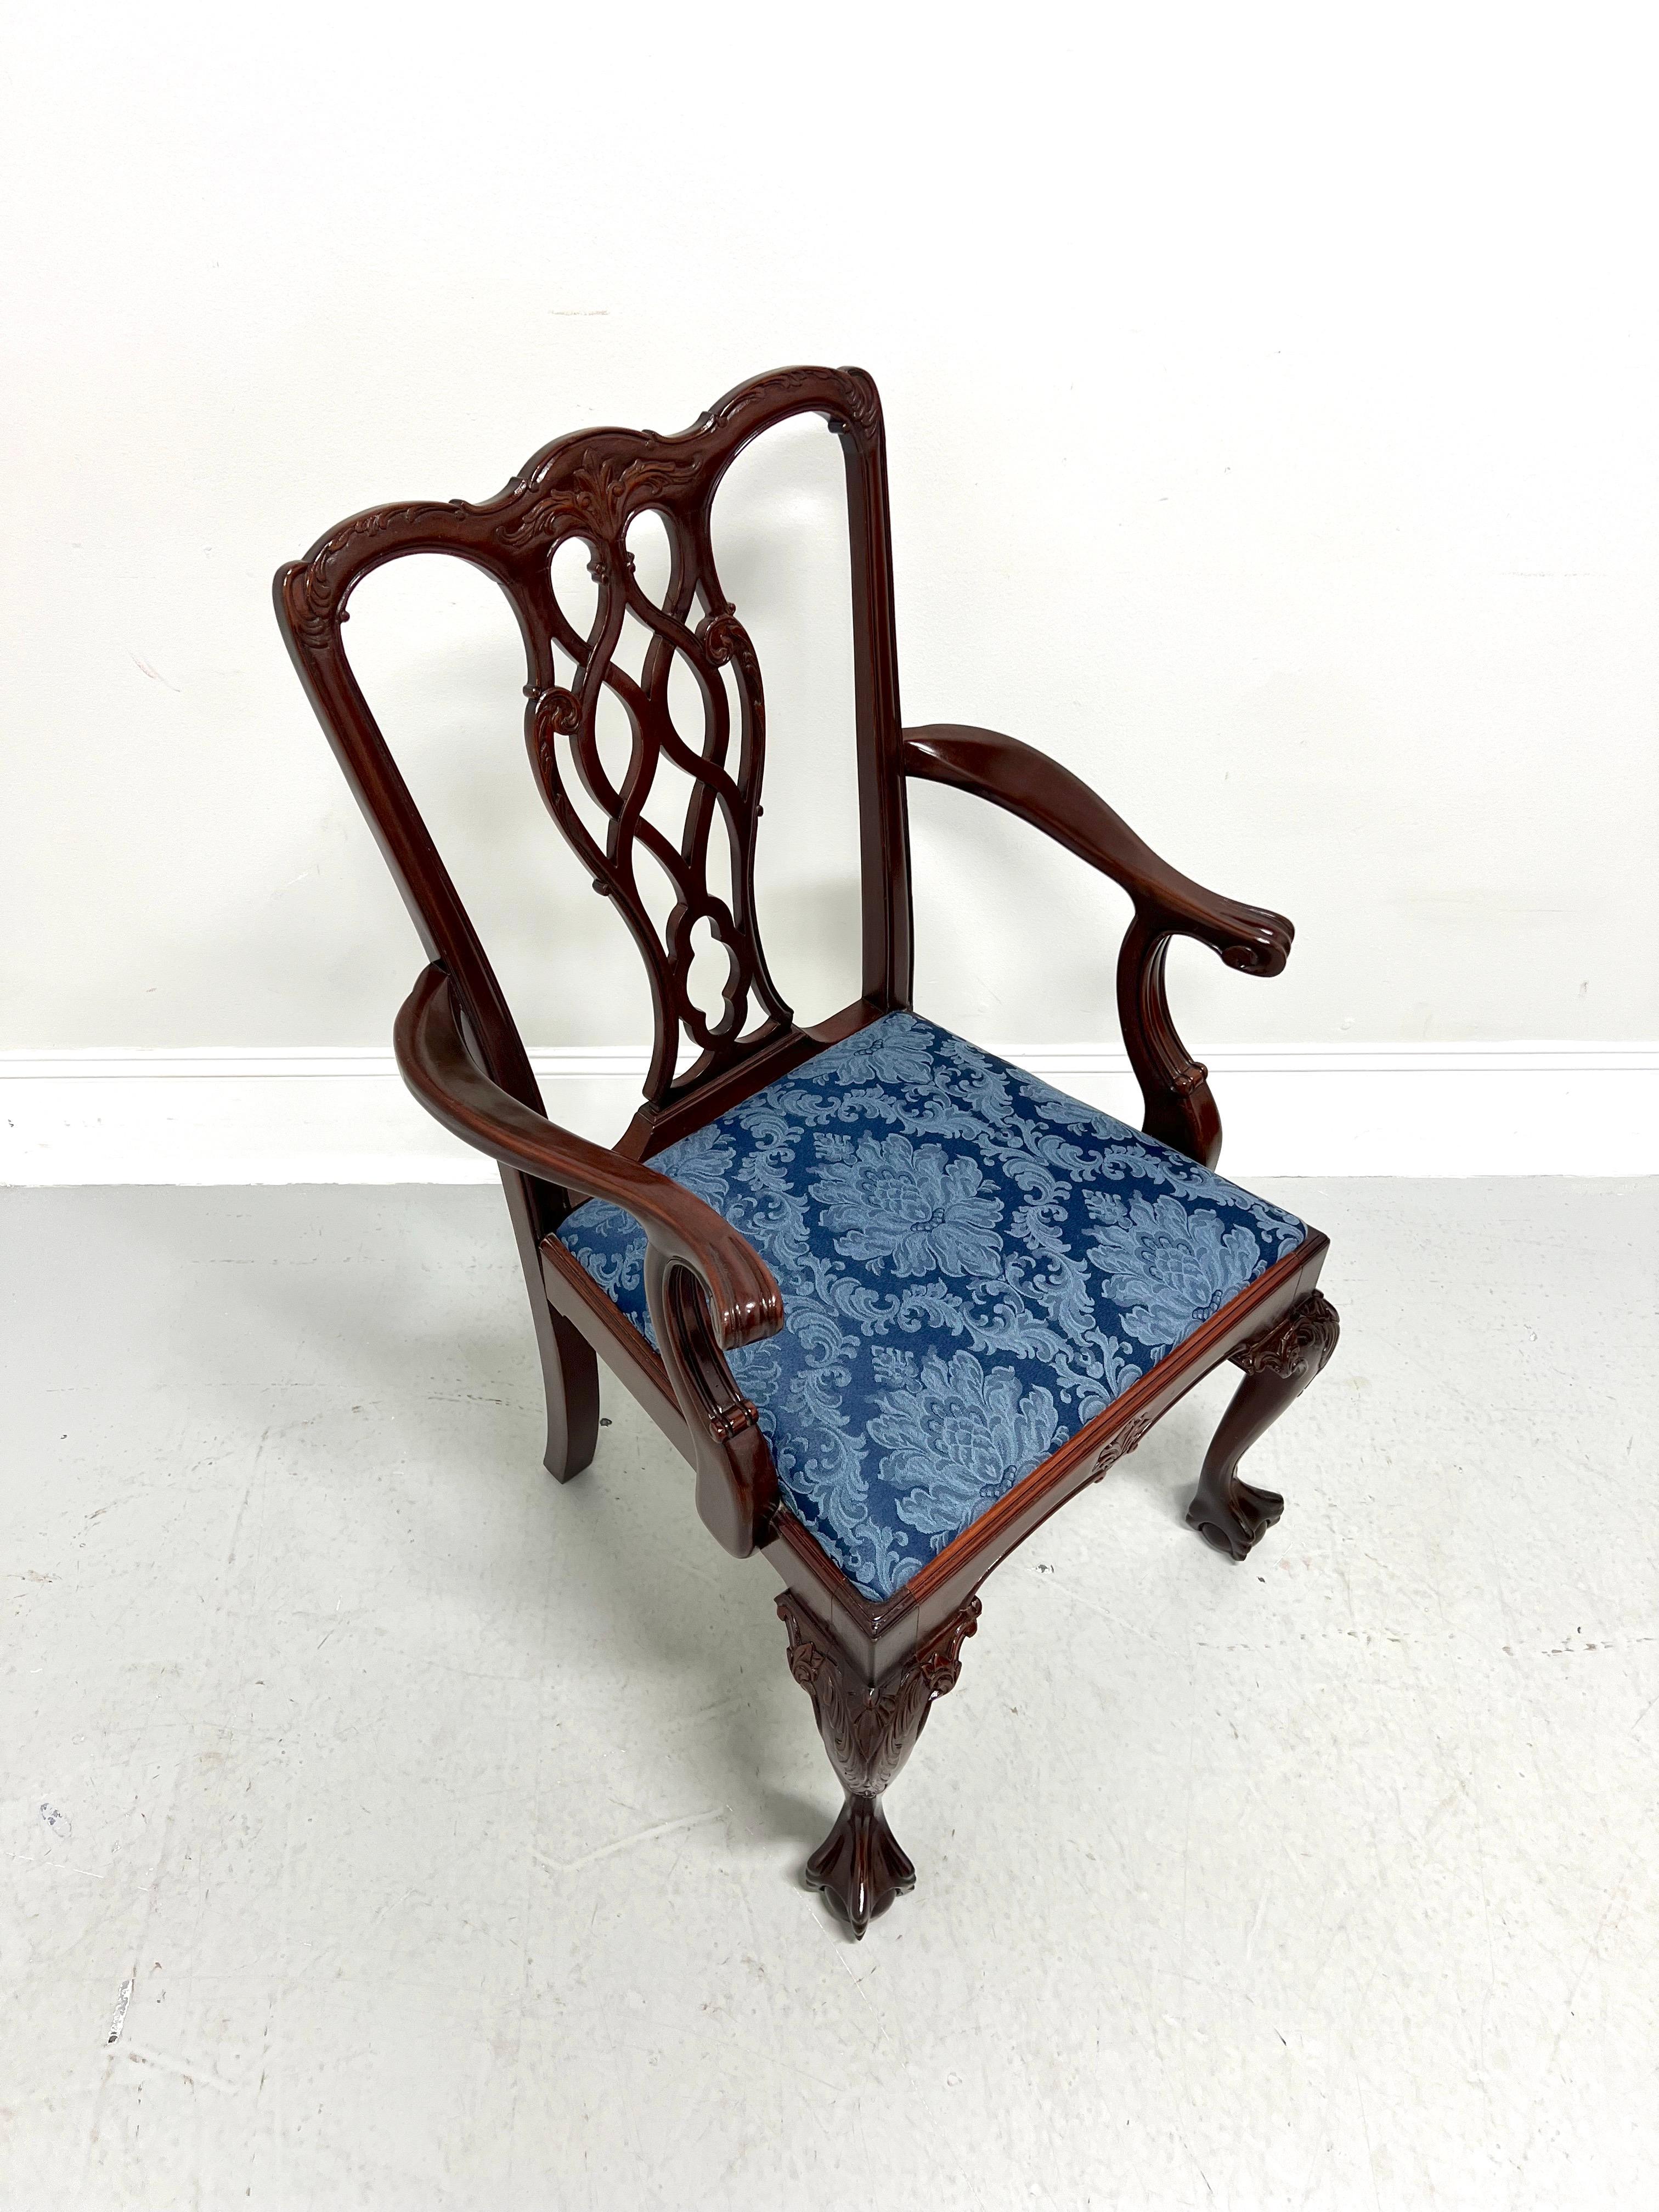 A Chippendale style armchair, unbranded. Solid mahogany with decoratively carved crest rail & backrest, curved carved arms with paw-like hand rests, fluted details to stiles, carved knees, cabriole front legs, and ball in claw feet. Seat is